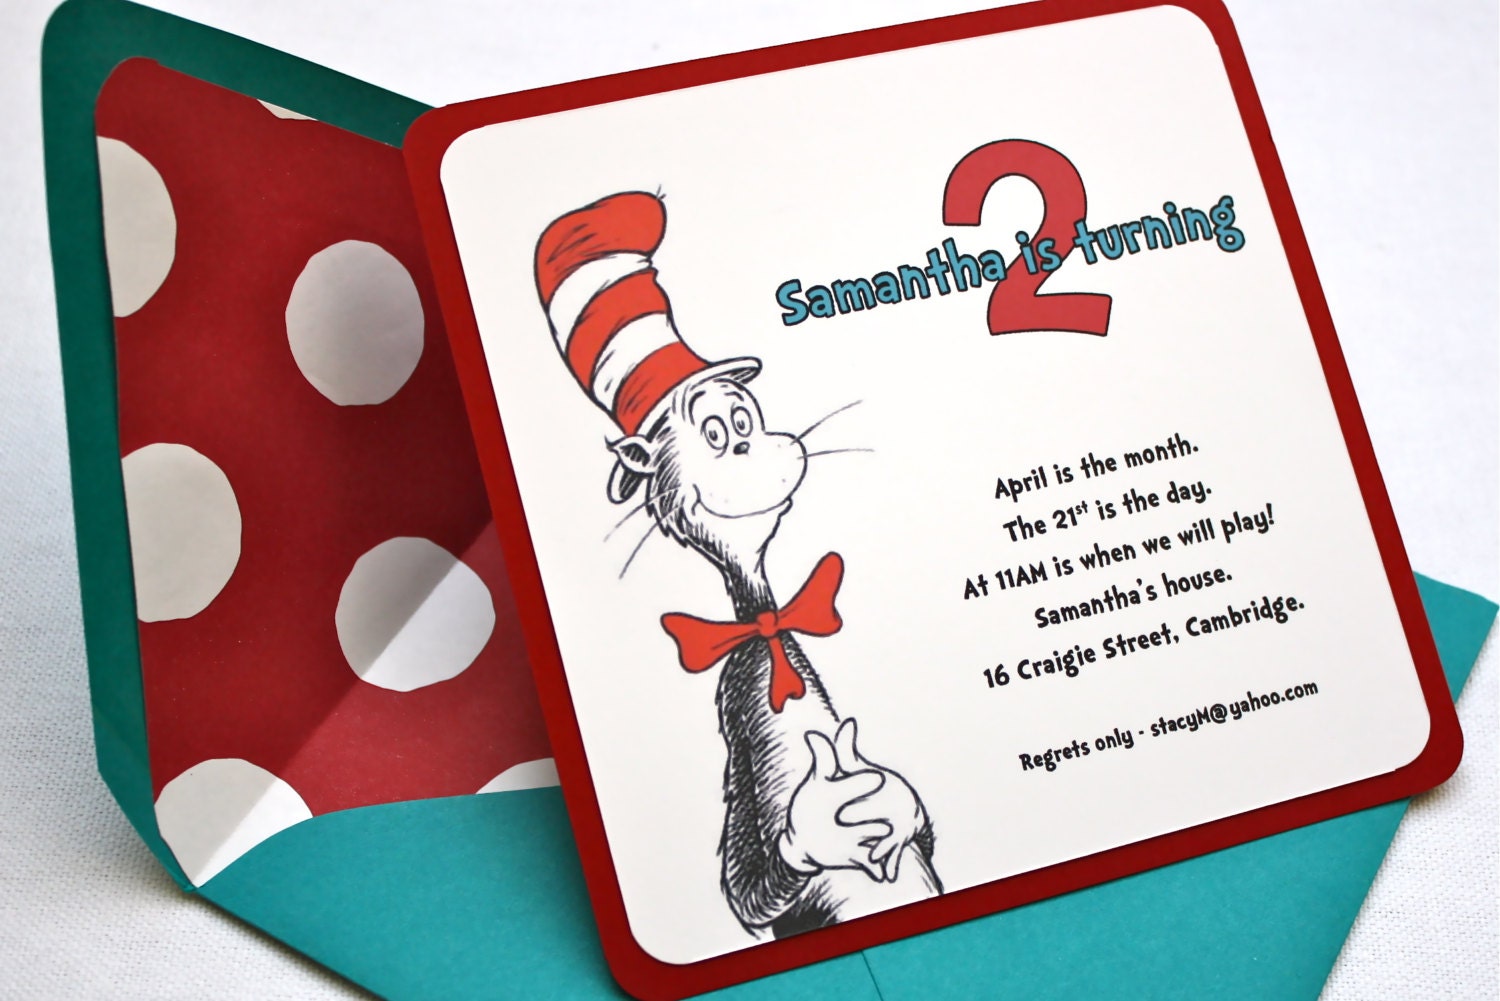 Dr. Seuss Birthday Party Invitation Square Envelope and